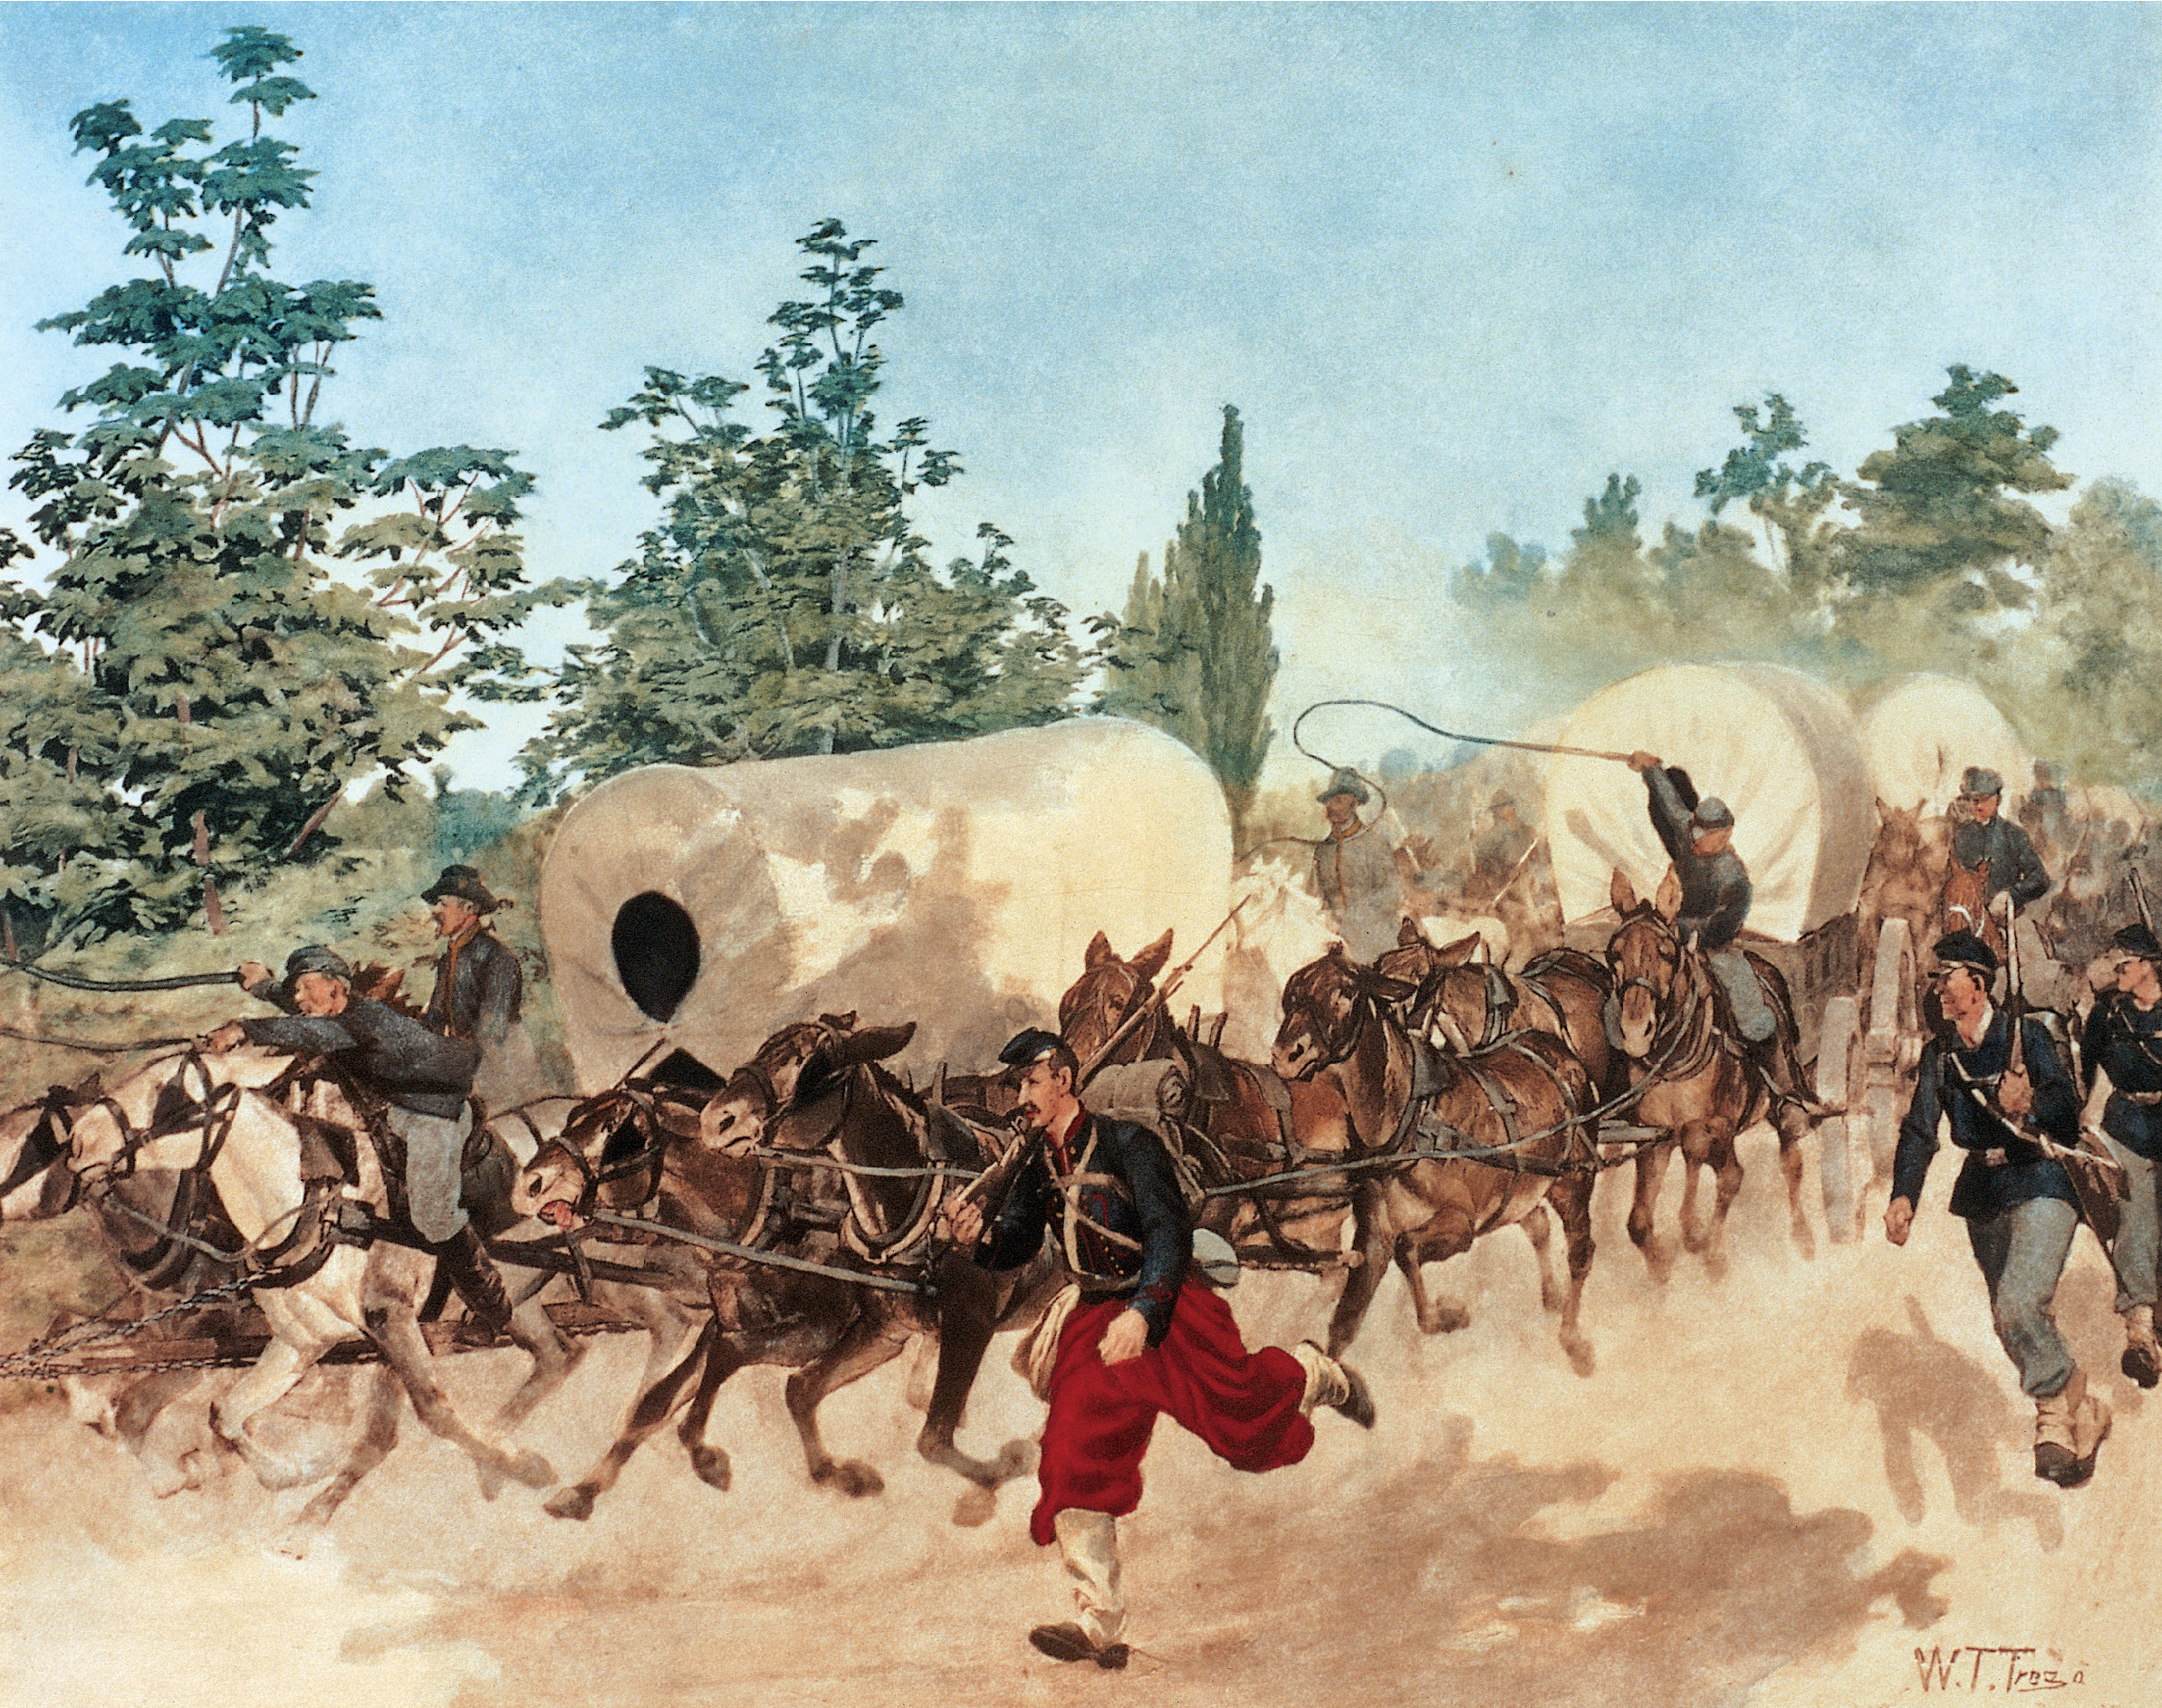 Federal soldiers make a hasty retreat back to Washington after the First Battle of Bull Run. W.H. Russell’s accurate account of the Union panic made him persona non grata to Union commanders.